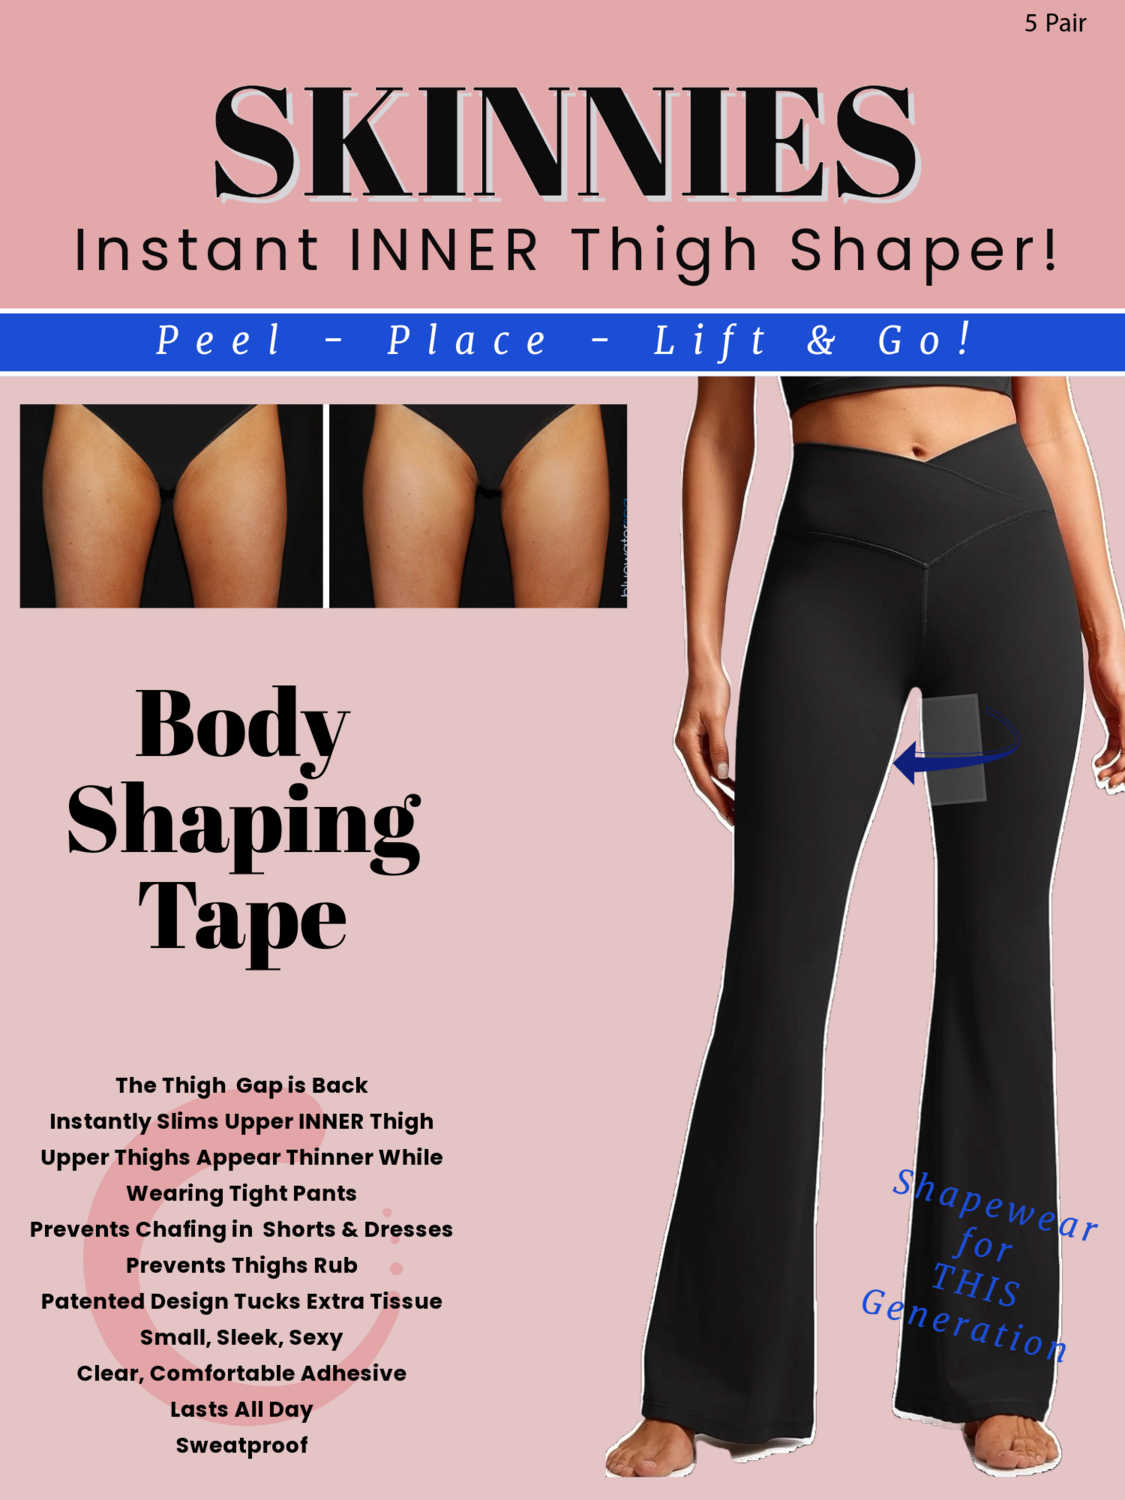 Skinnies INNER Thigh Lifts! Instantly Slim Rubbing Thighs Reduces